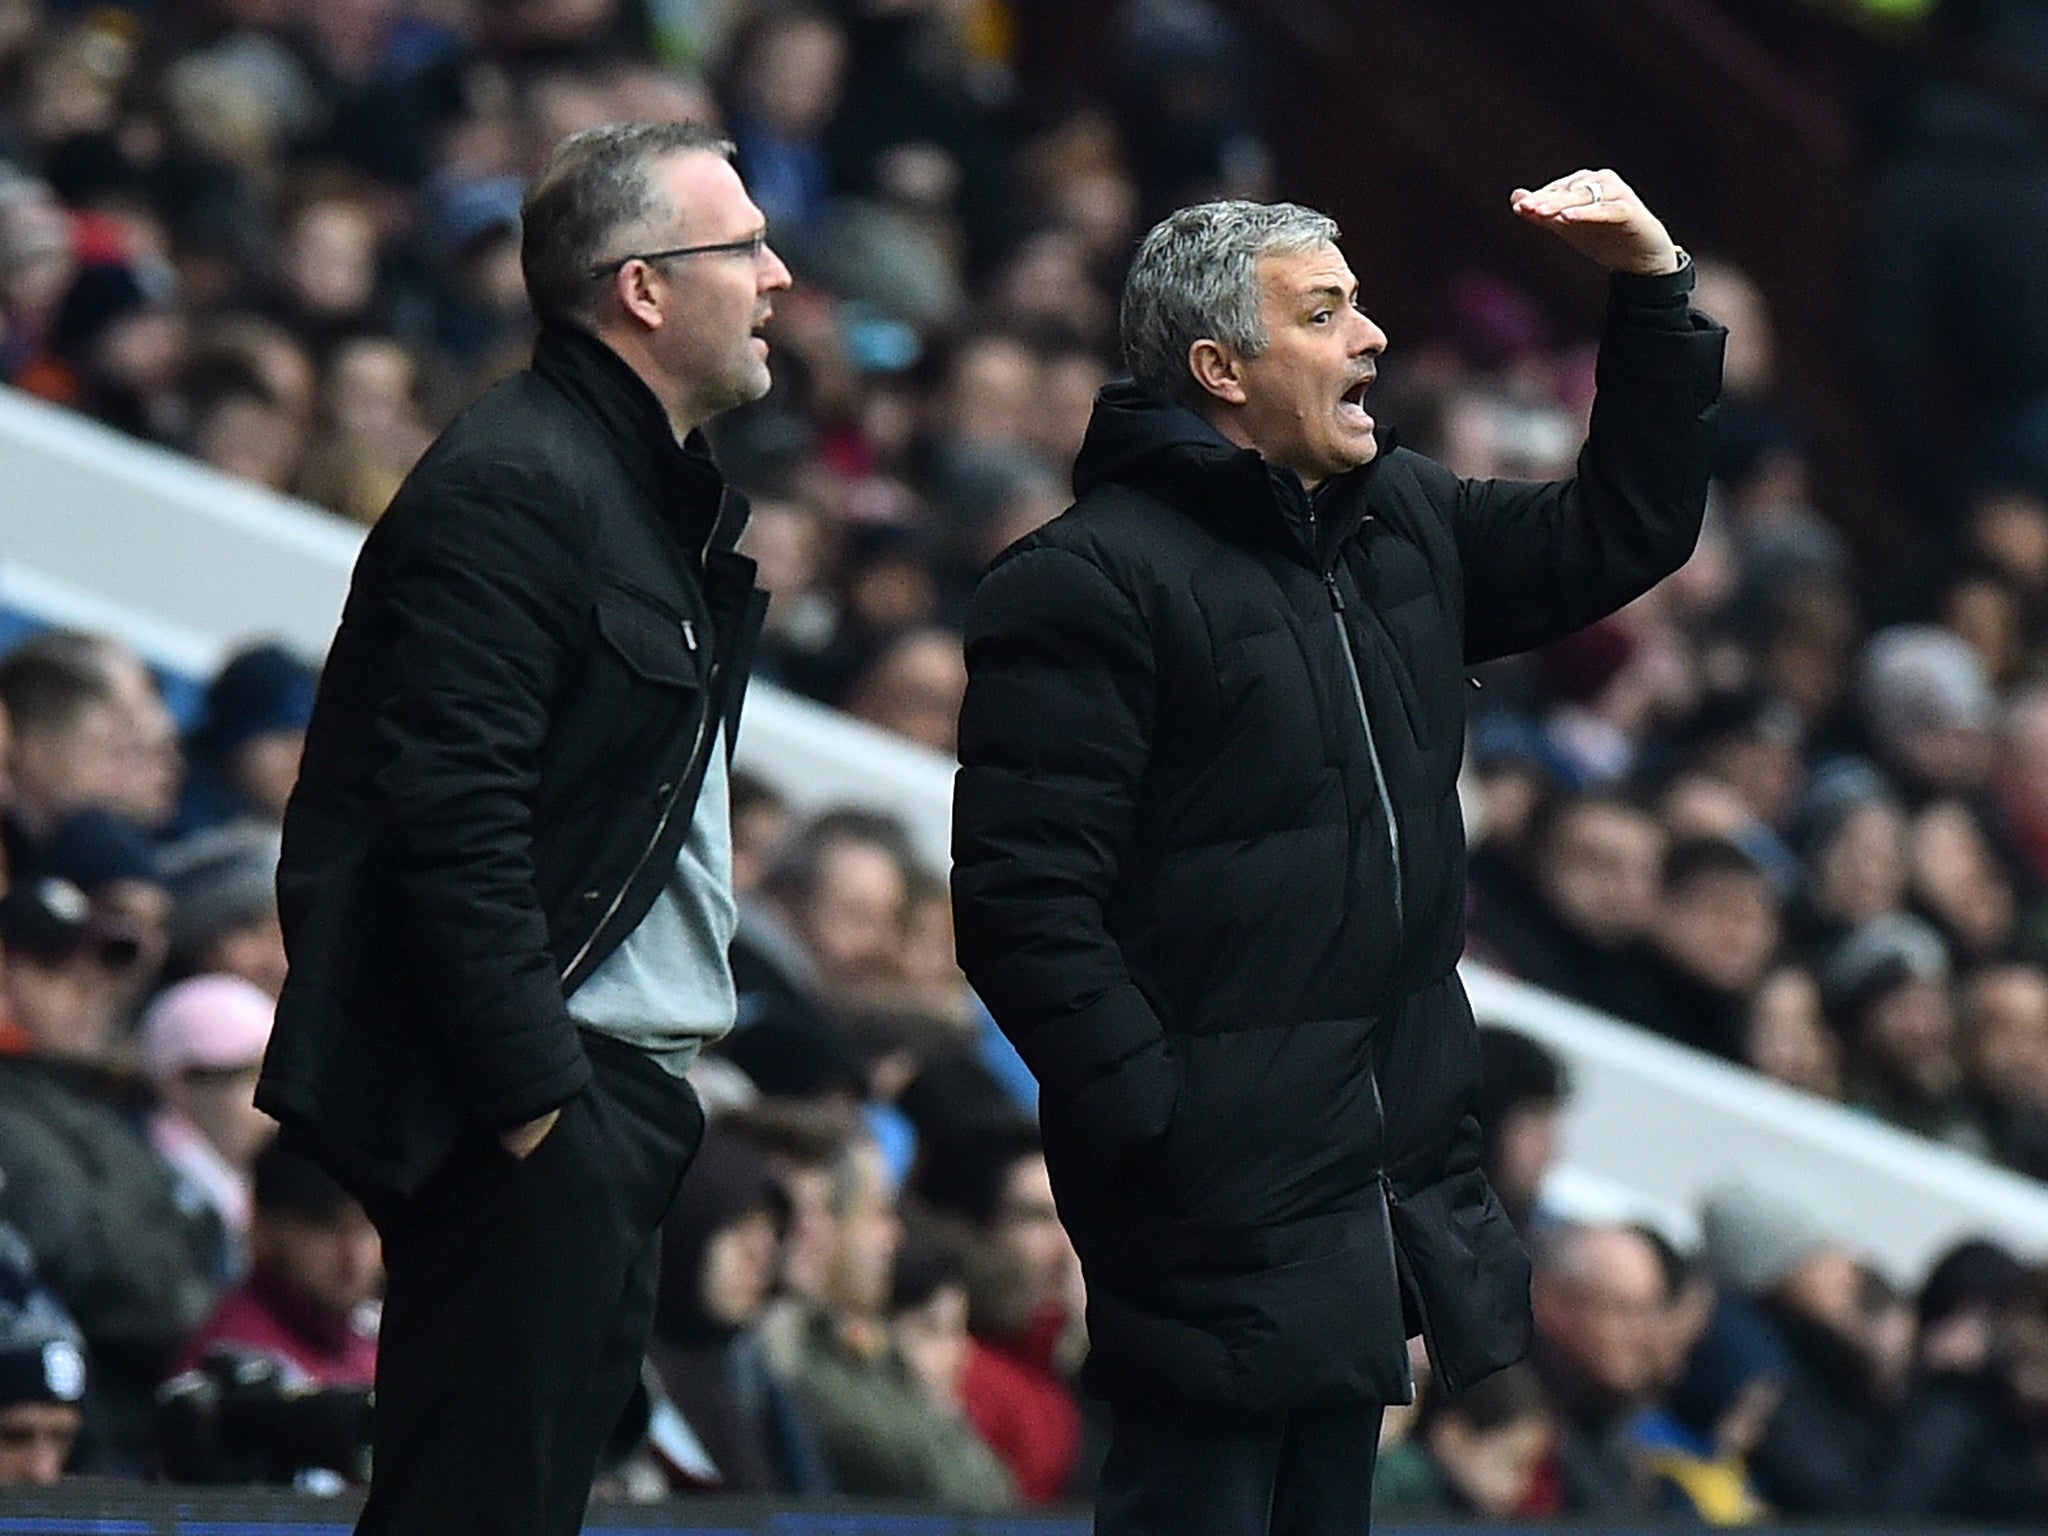 Despite the loss to Mourinho's men, Paul Lambert is taking heart from his side’s “excellent” performance (Getty)